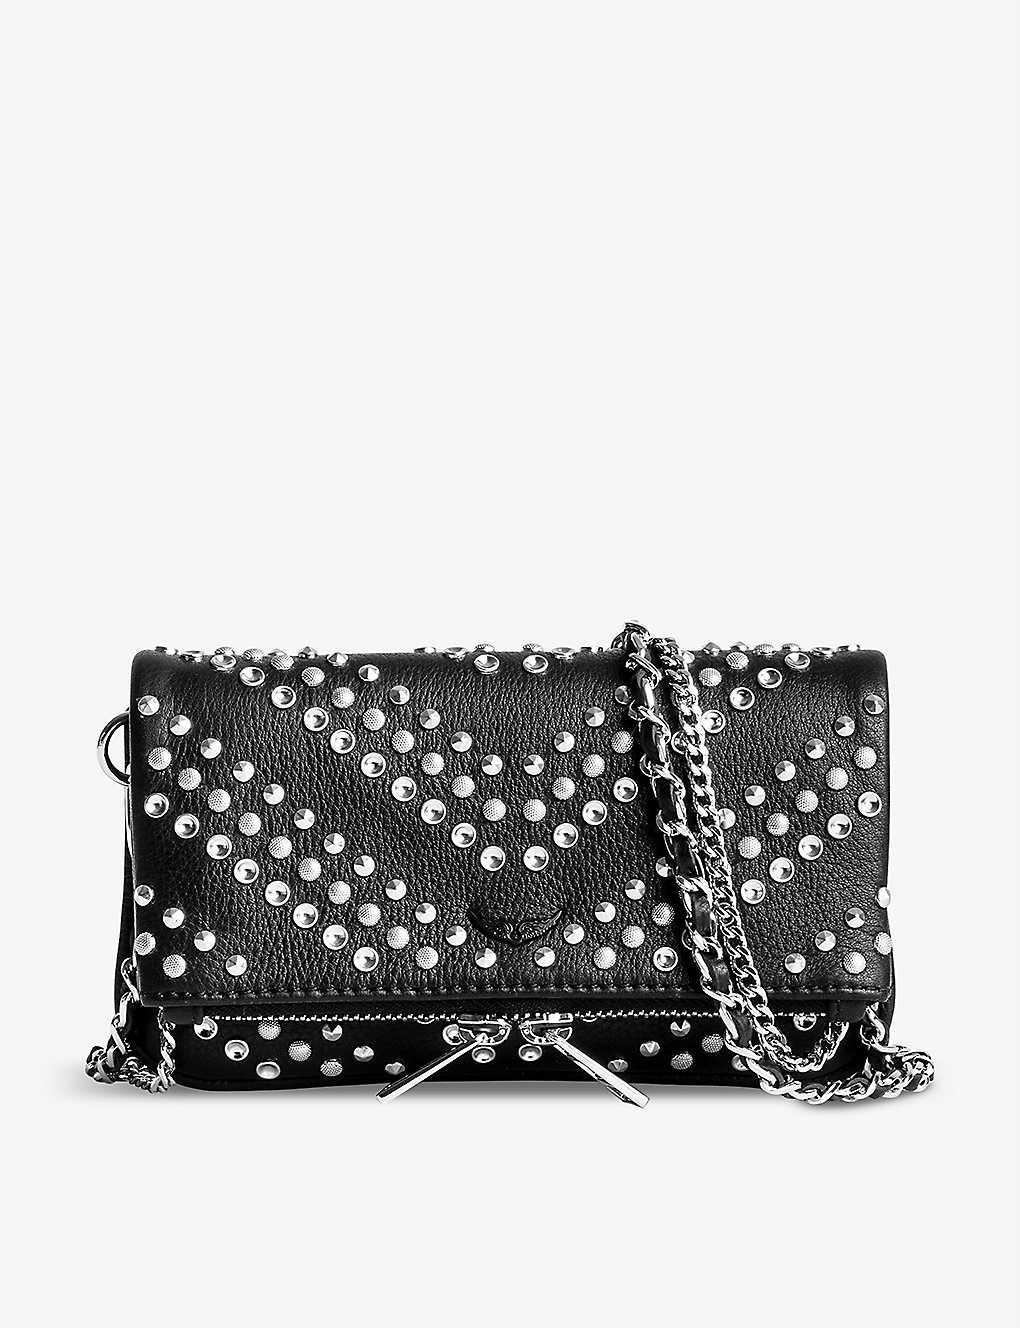 NWT Zadig & Voltaire Grained Leather Nano Rock Stud Clutch